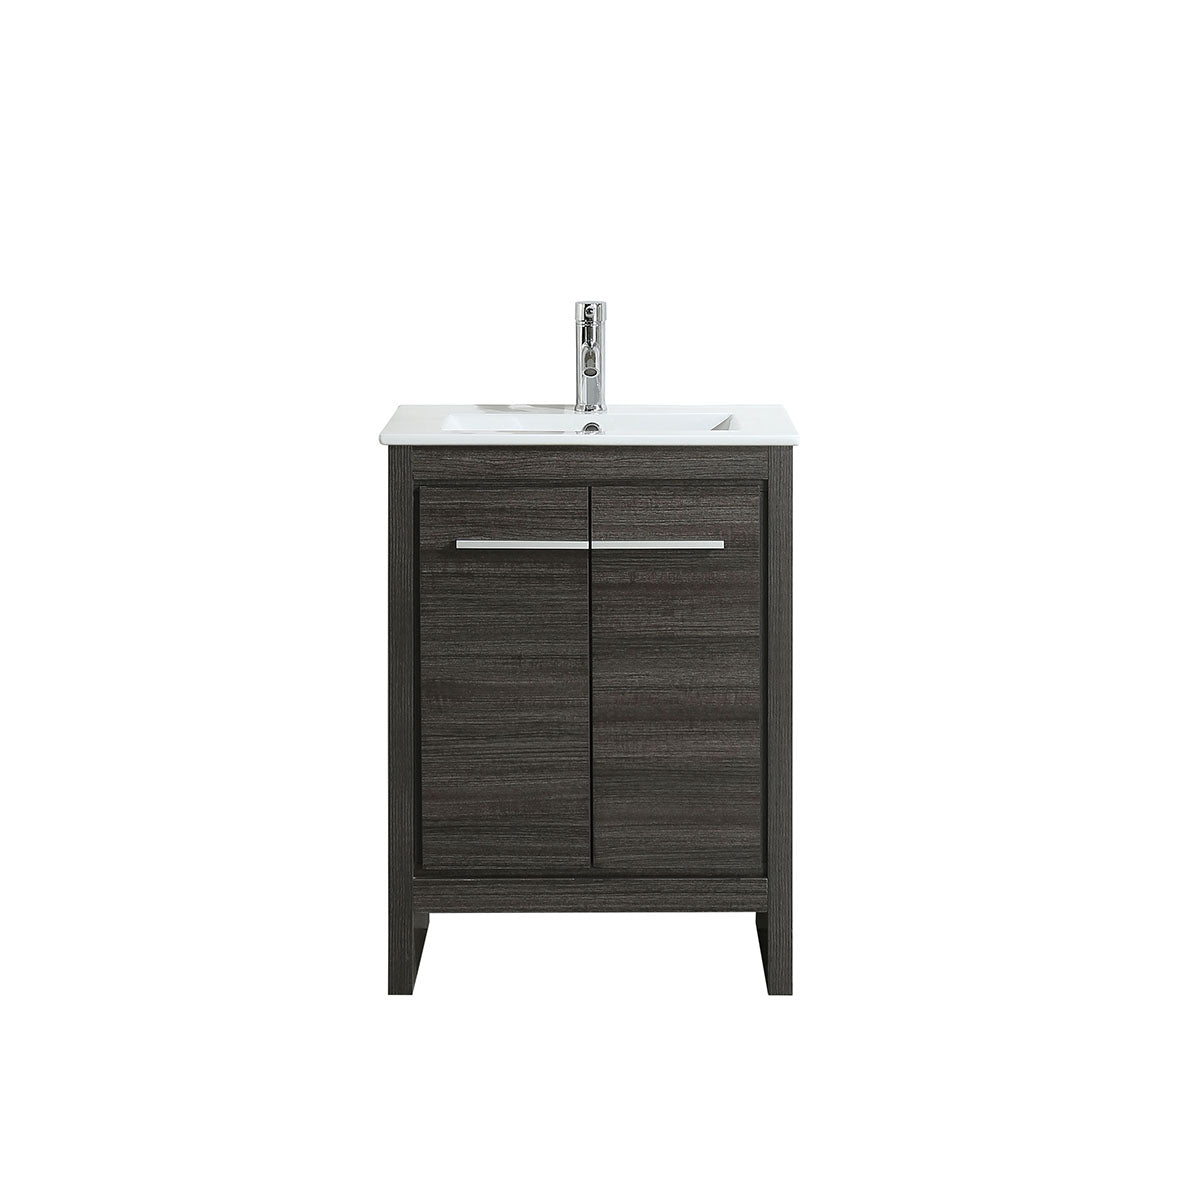 24" Vanity with Ceramic Sink (Charcoal Grey) V9004 Series - iStyle Bath